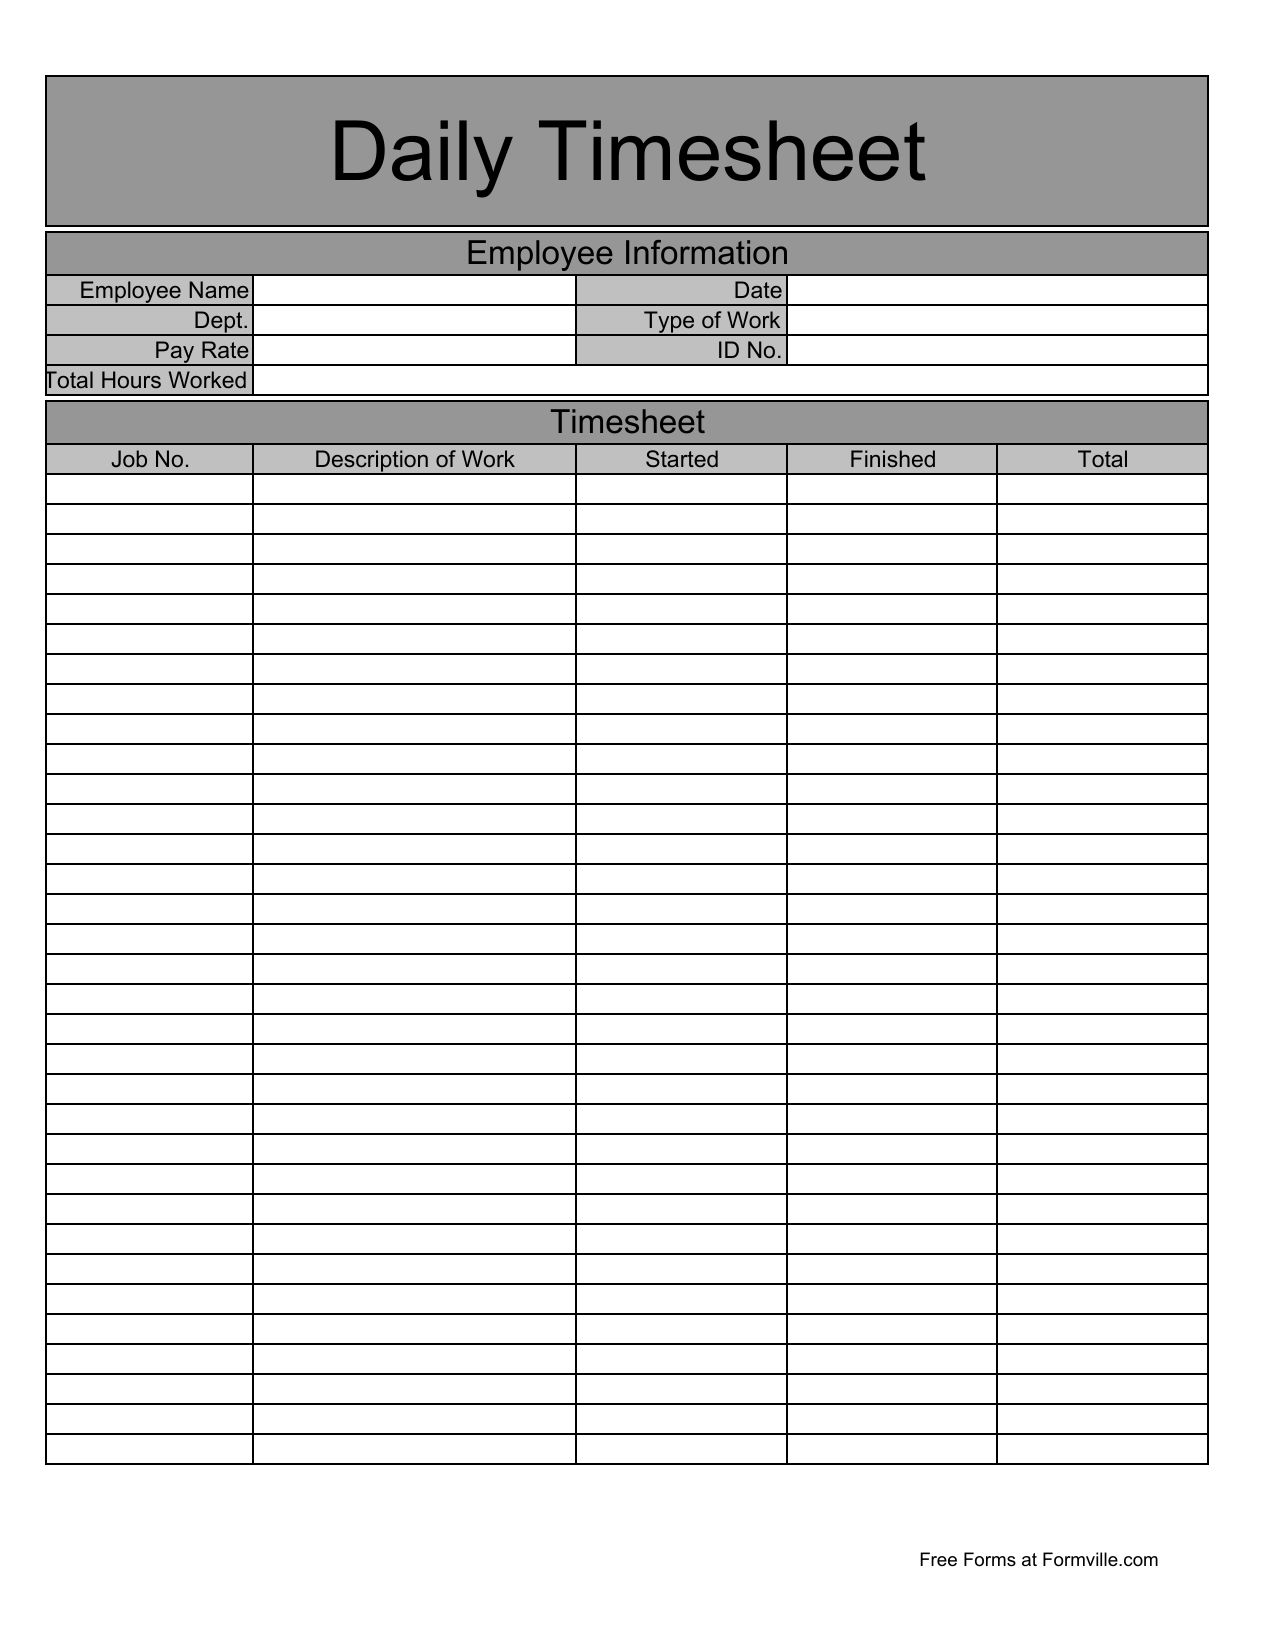 Daily Timesheet Template Excel Free Download